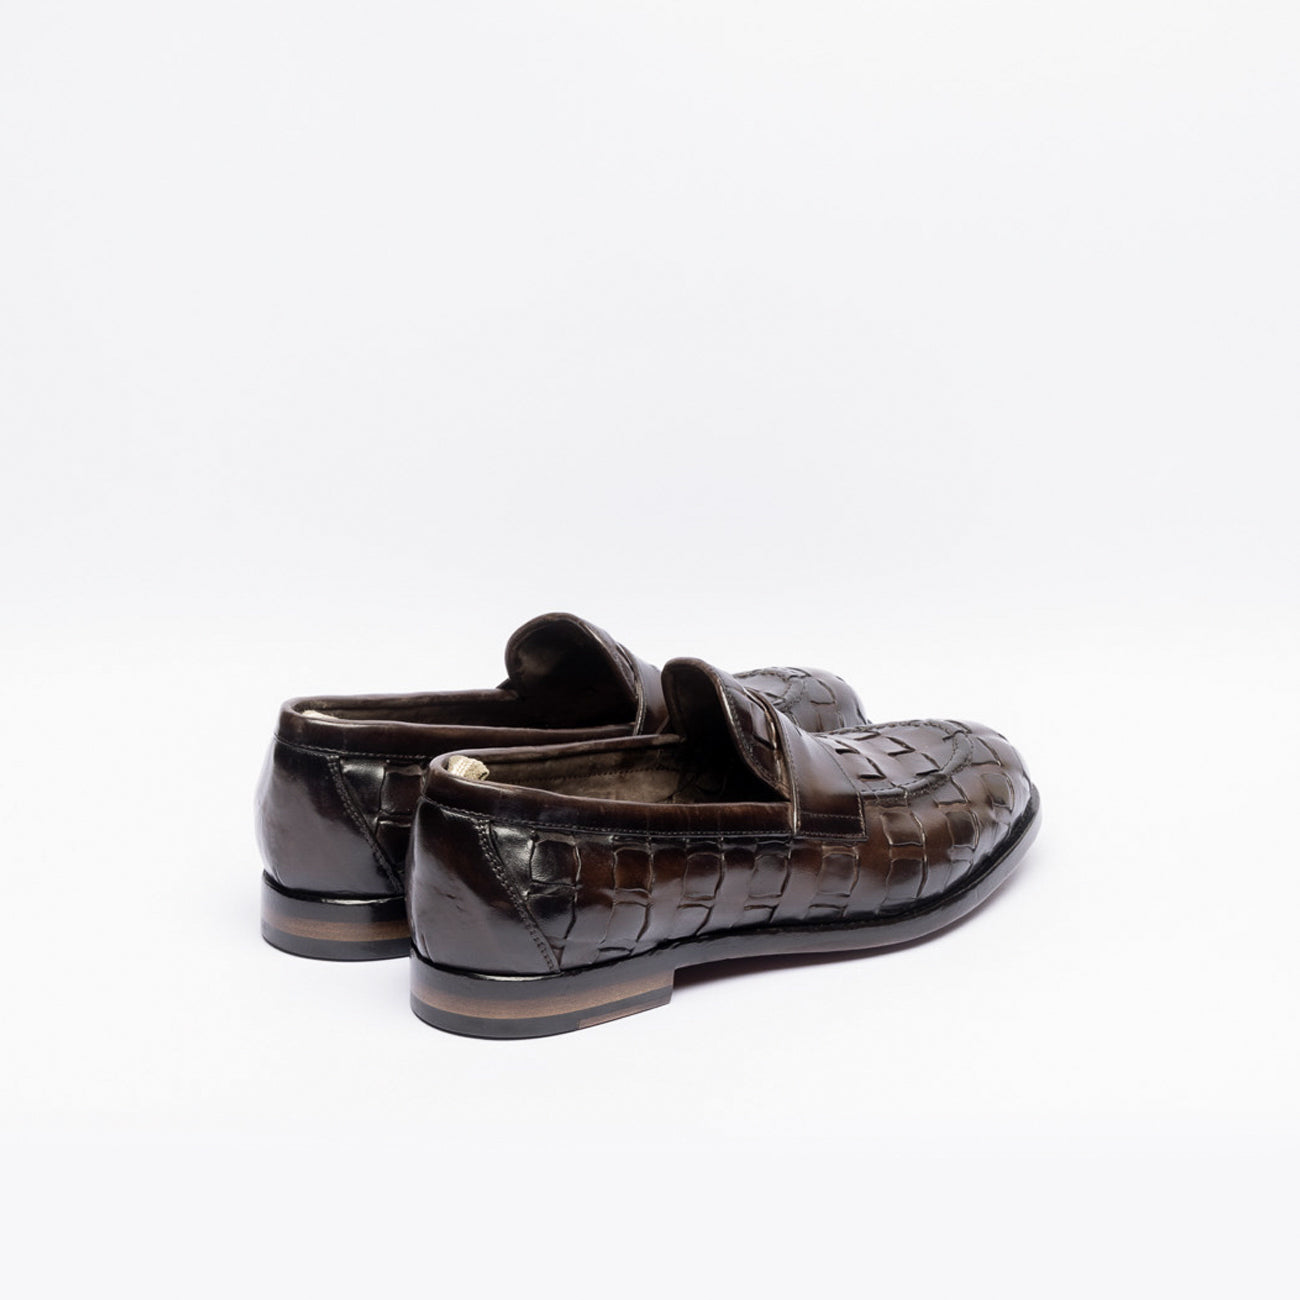 Penny loafer Officine Creative Ivy/016 in brown woven leather